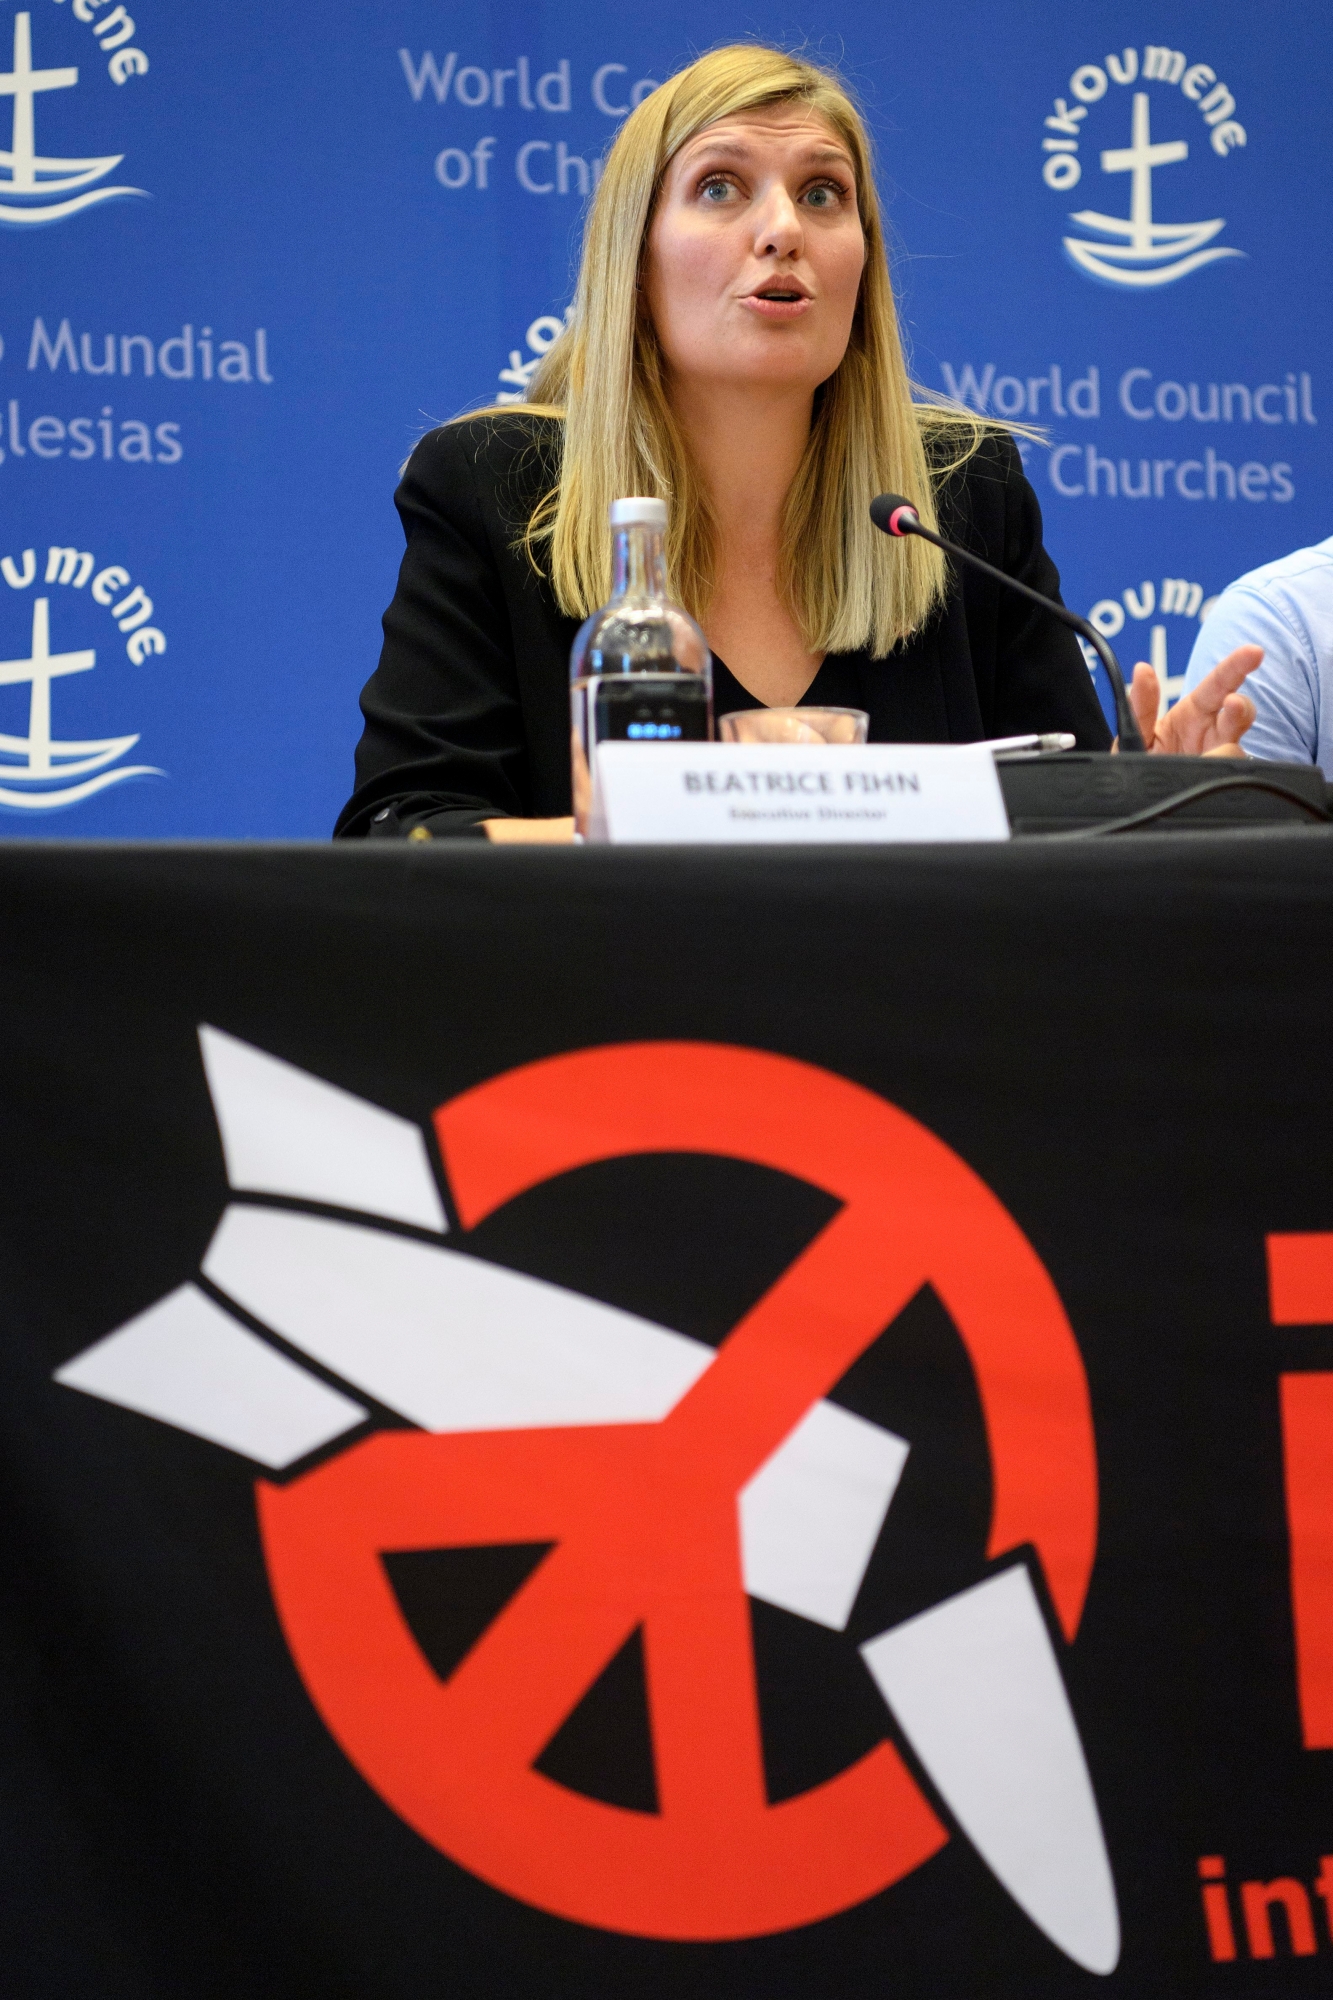 Beatrice Fihn, Executive Director of the International campaign to abolish Nuclear Weapons (ICAN), speaks during a press conference, about the announcement of the Nobel Peace Prize at the headquarters of the International campaign to abolish Nuclear Weapons (ICAN), in Geneva, Switzerland, on Friday, October 6, 2017. The International campaign to abolish Nuclear Weapons (ICAN) is the winner of this year's Nobel Peace Prize. (KEYSTONE/Martial Trezzini) SWITZERLAND NOBEL PEACE PRIZE FOR ICAN